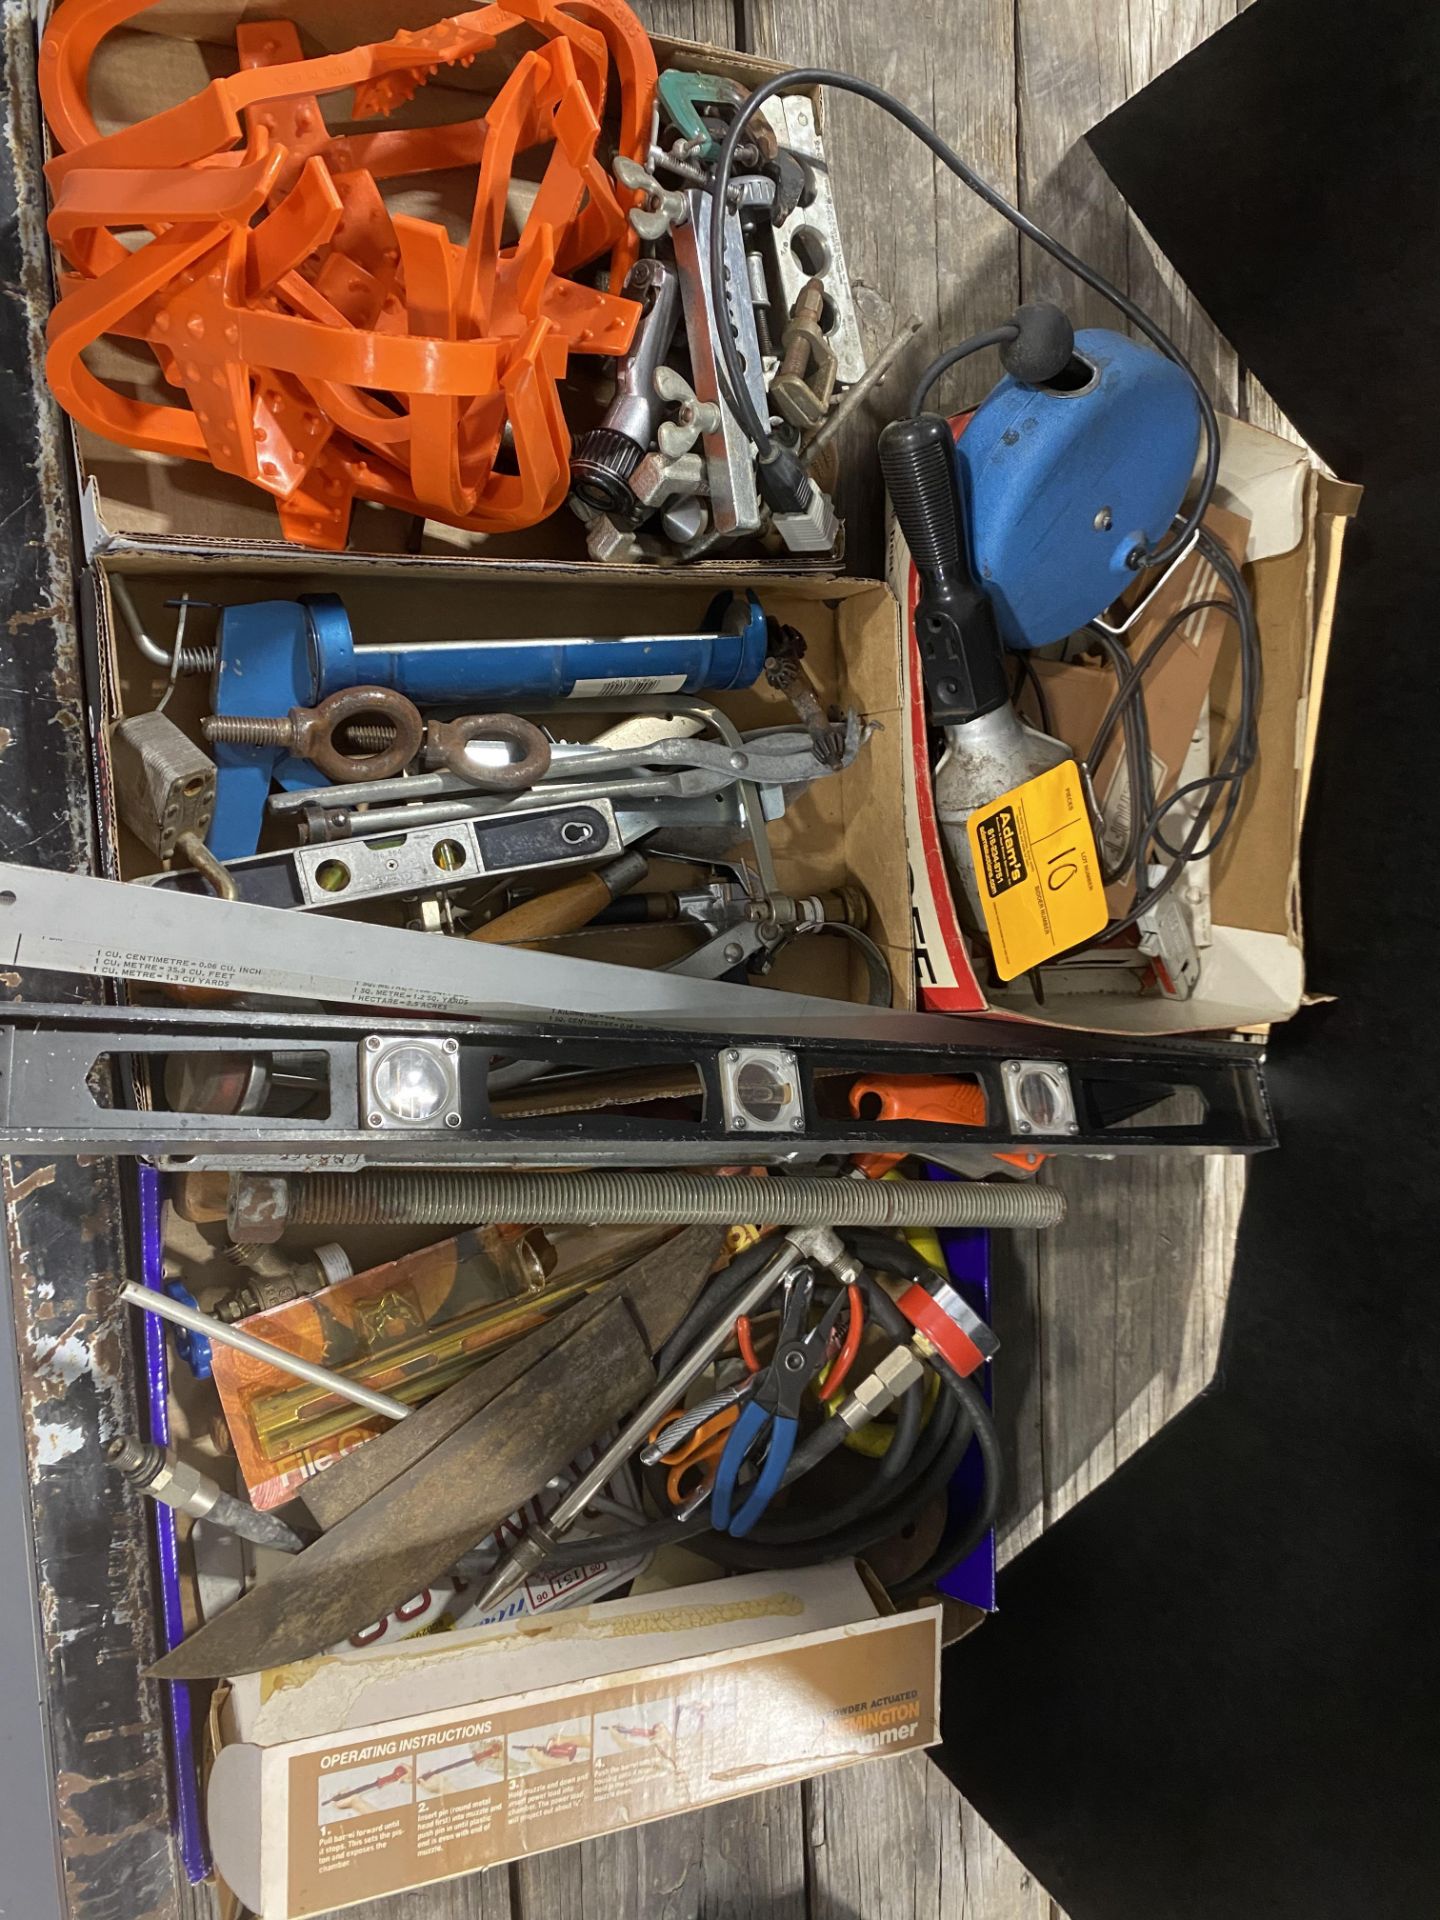 DROP LIGHT, WIRE CUTTERS, EYE BOLTS, LEVEL, OIL CAN WRENCH, REMINGTON POWER HAMMER, AND MORE